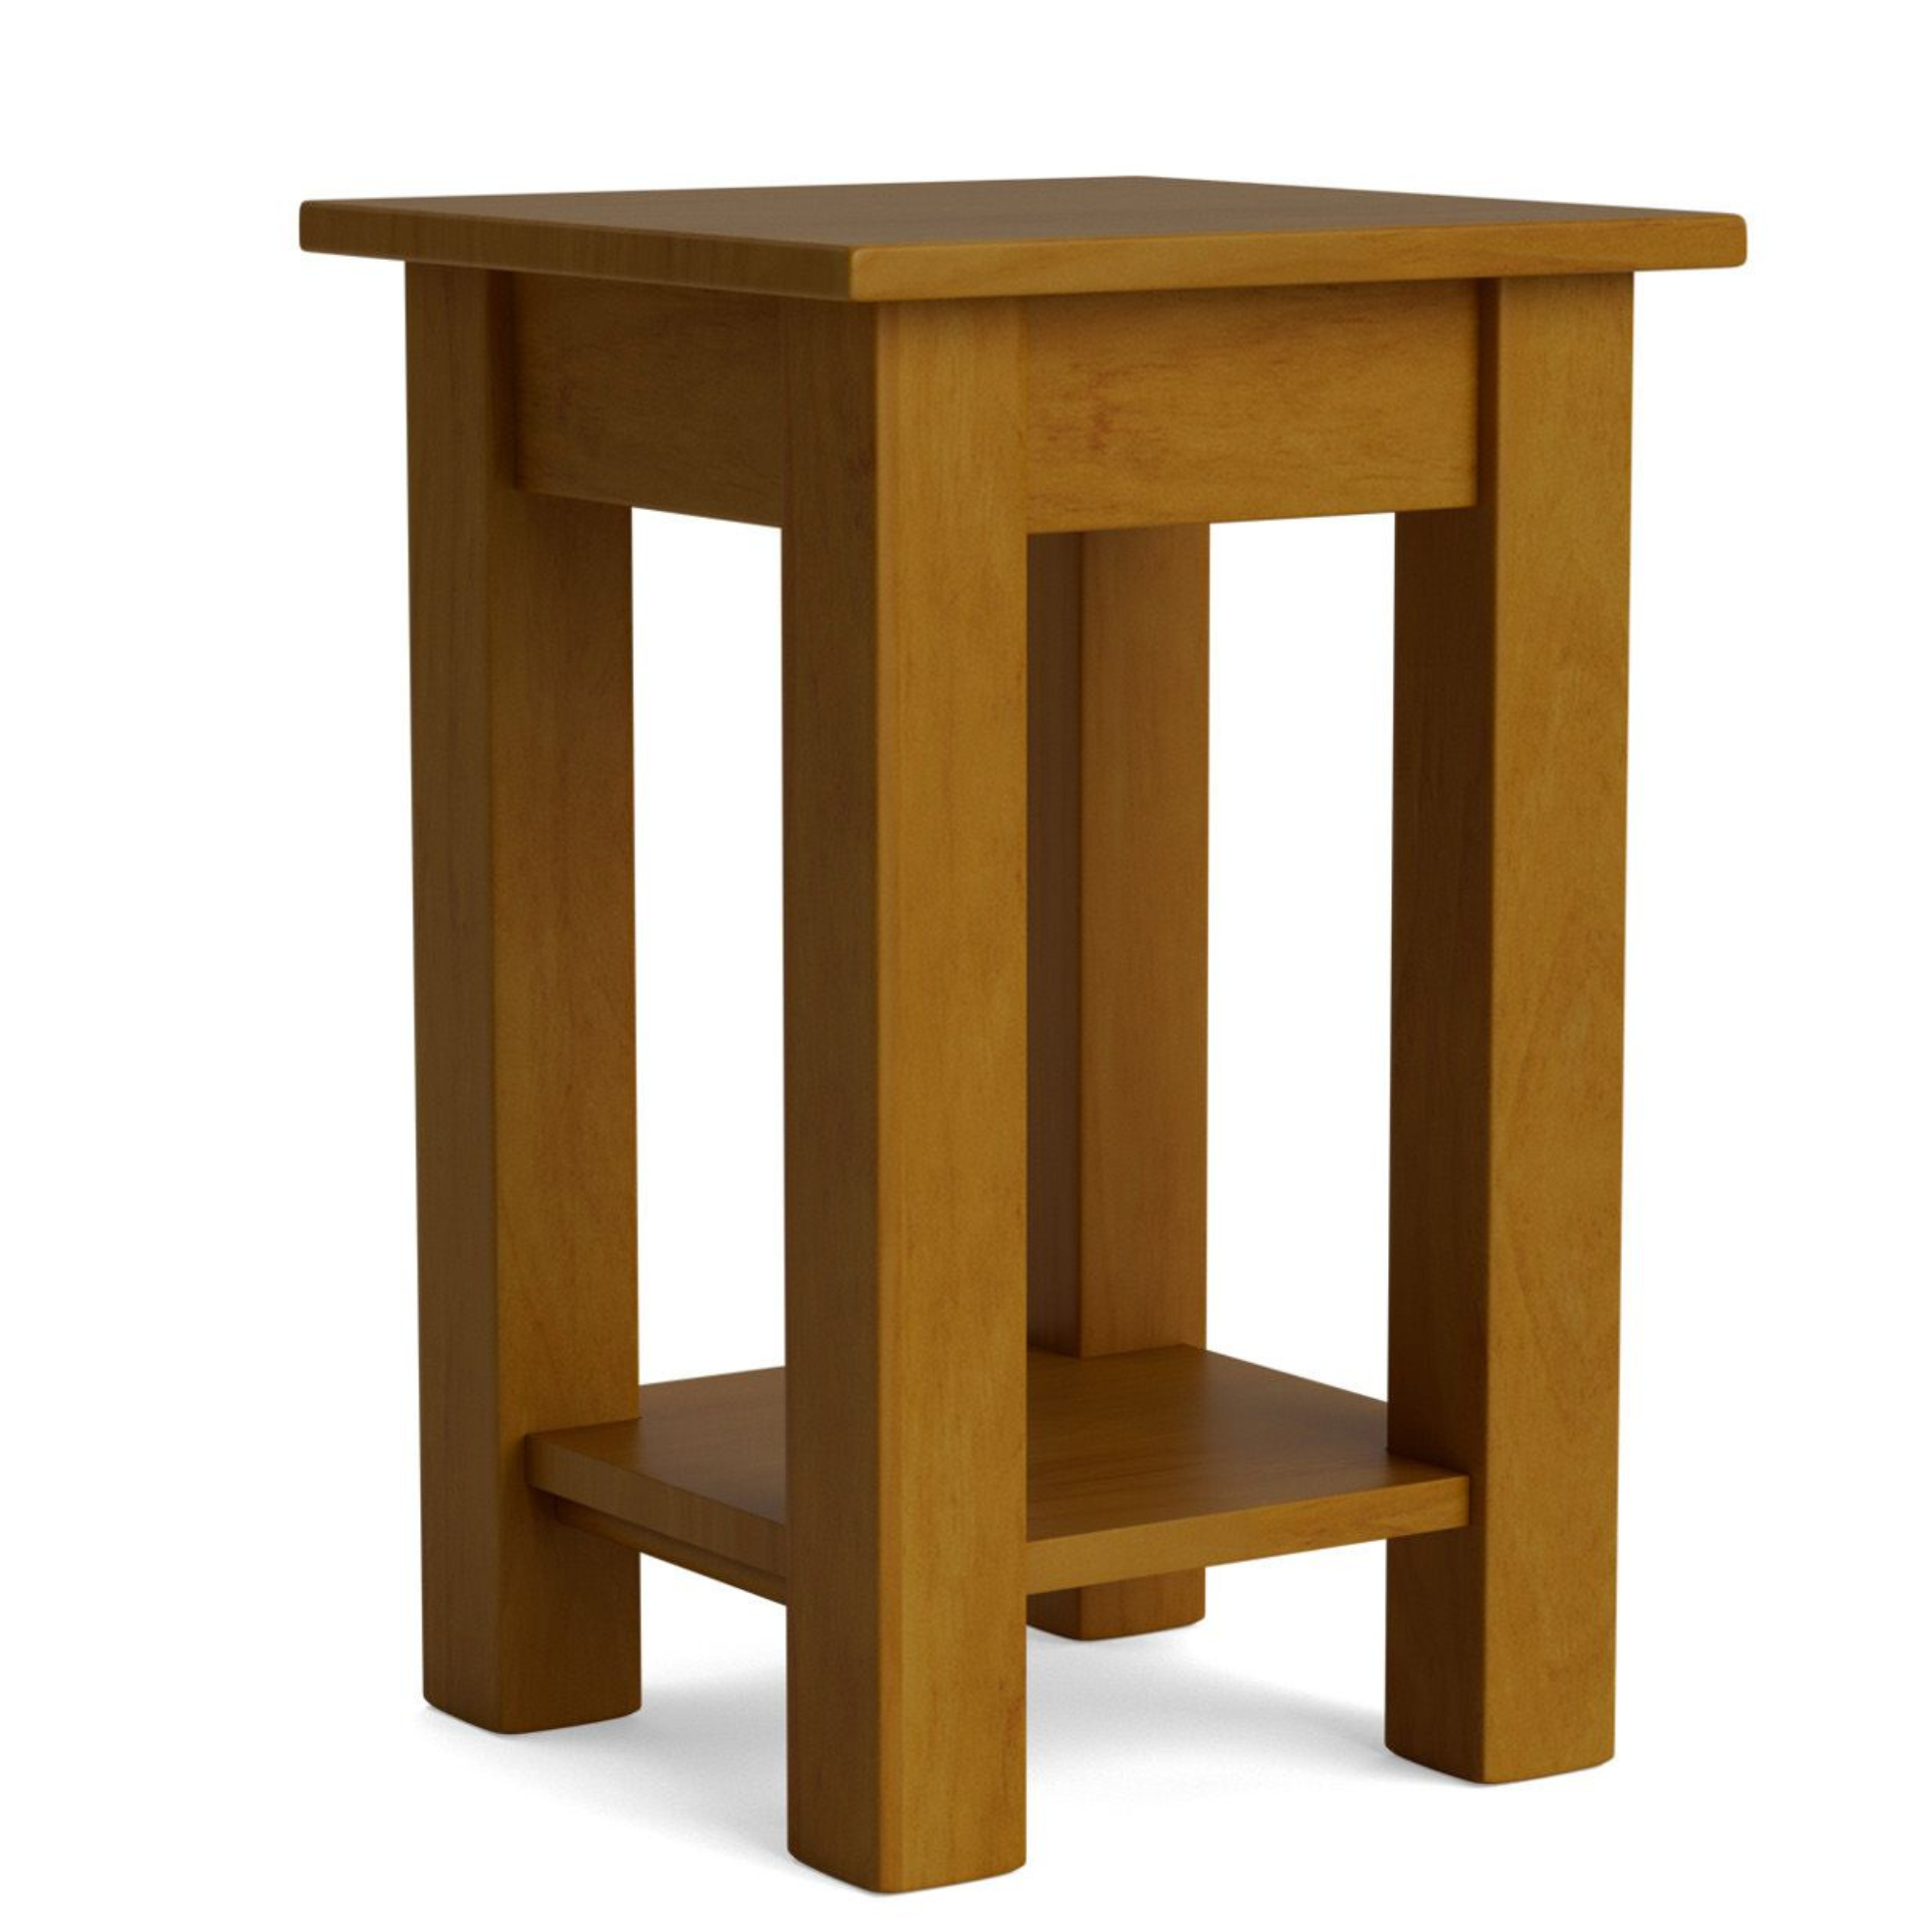 CHARLTON SIDE TABLE | END TABLE | NZ MADE